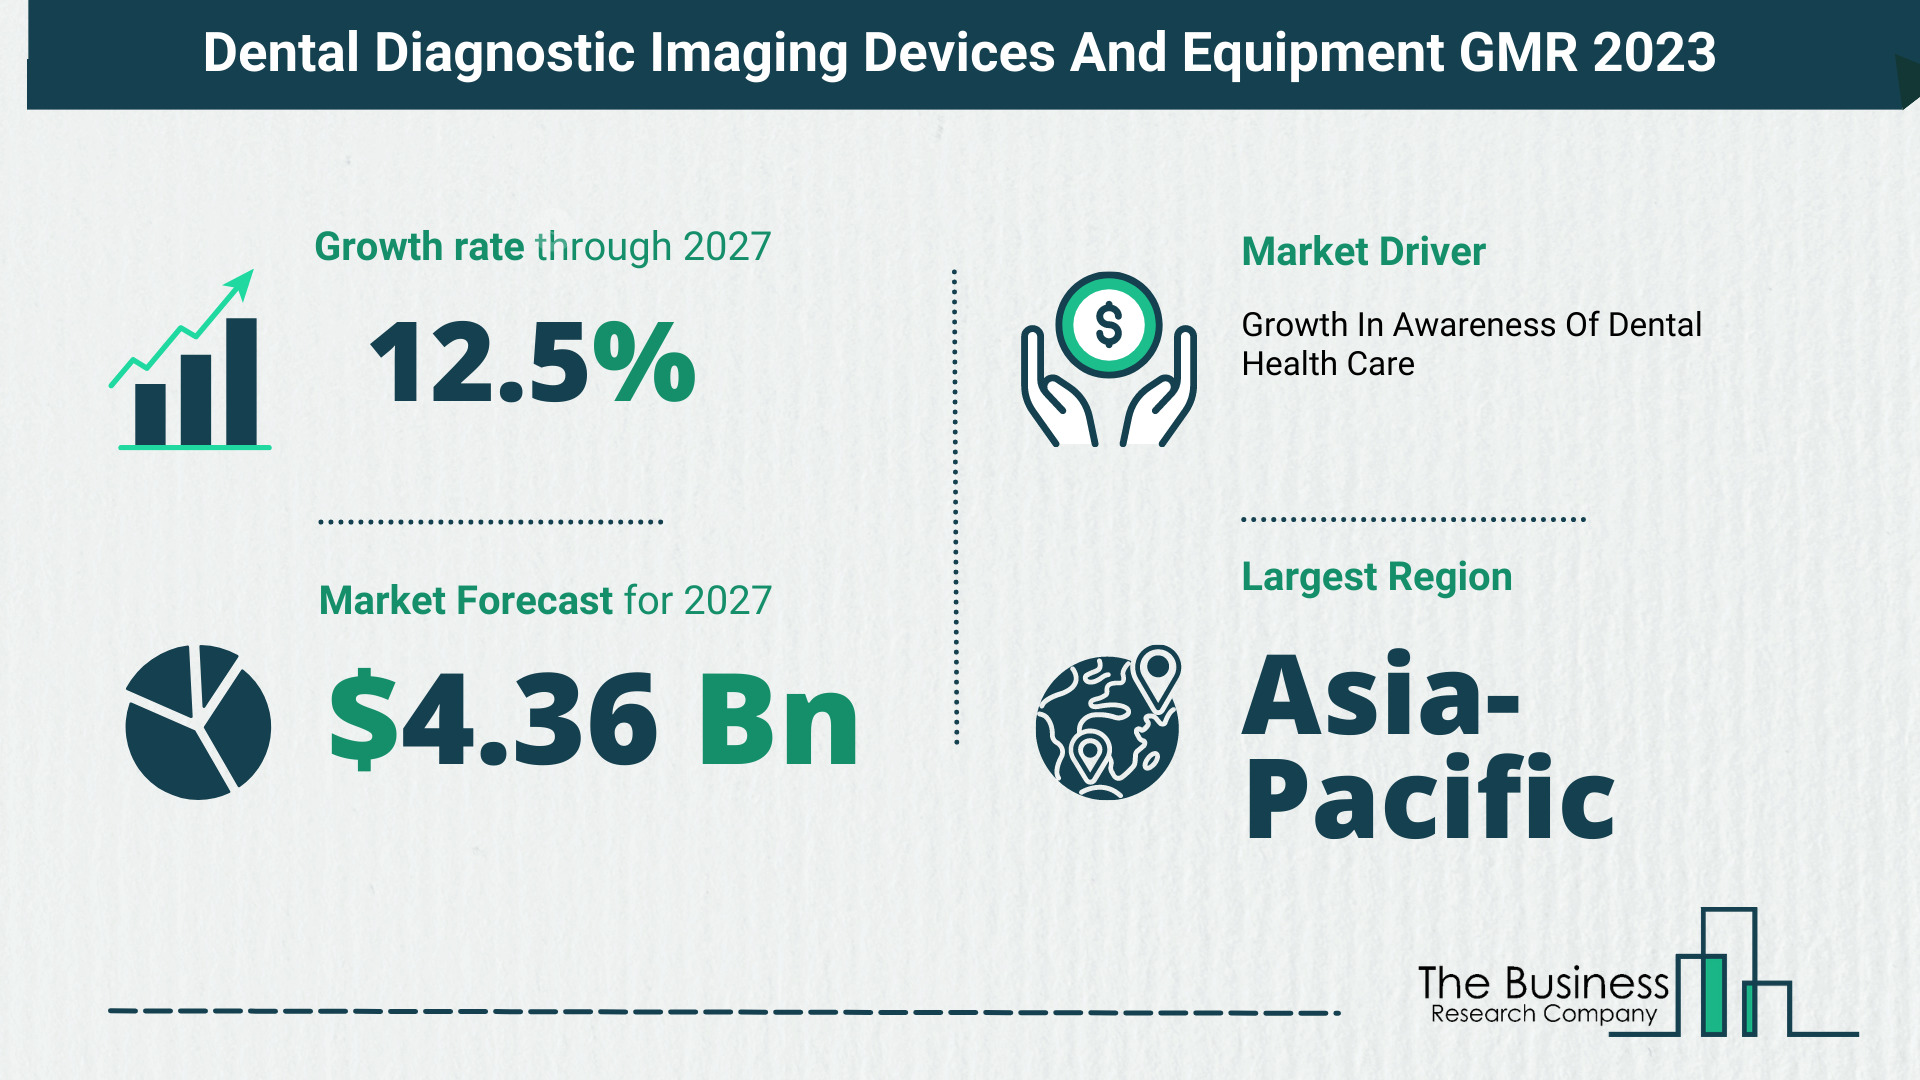 Dental Diagnostic Imaging Devices And Equipment Market Forecast 2023-2027 By The Business Research Company